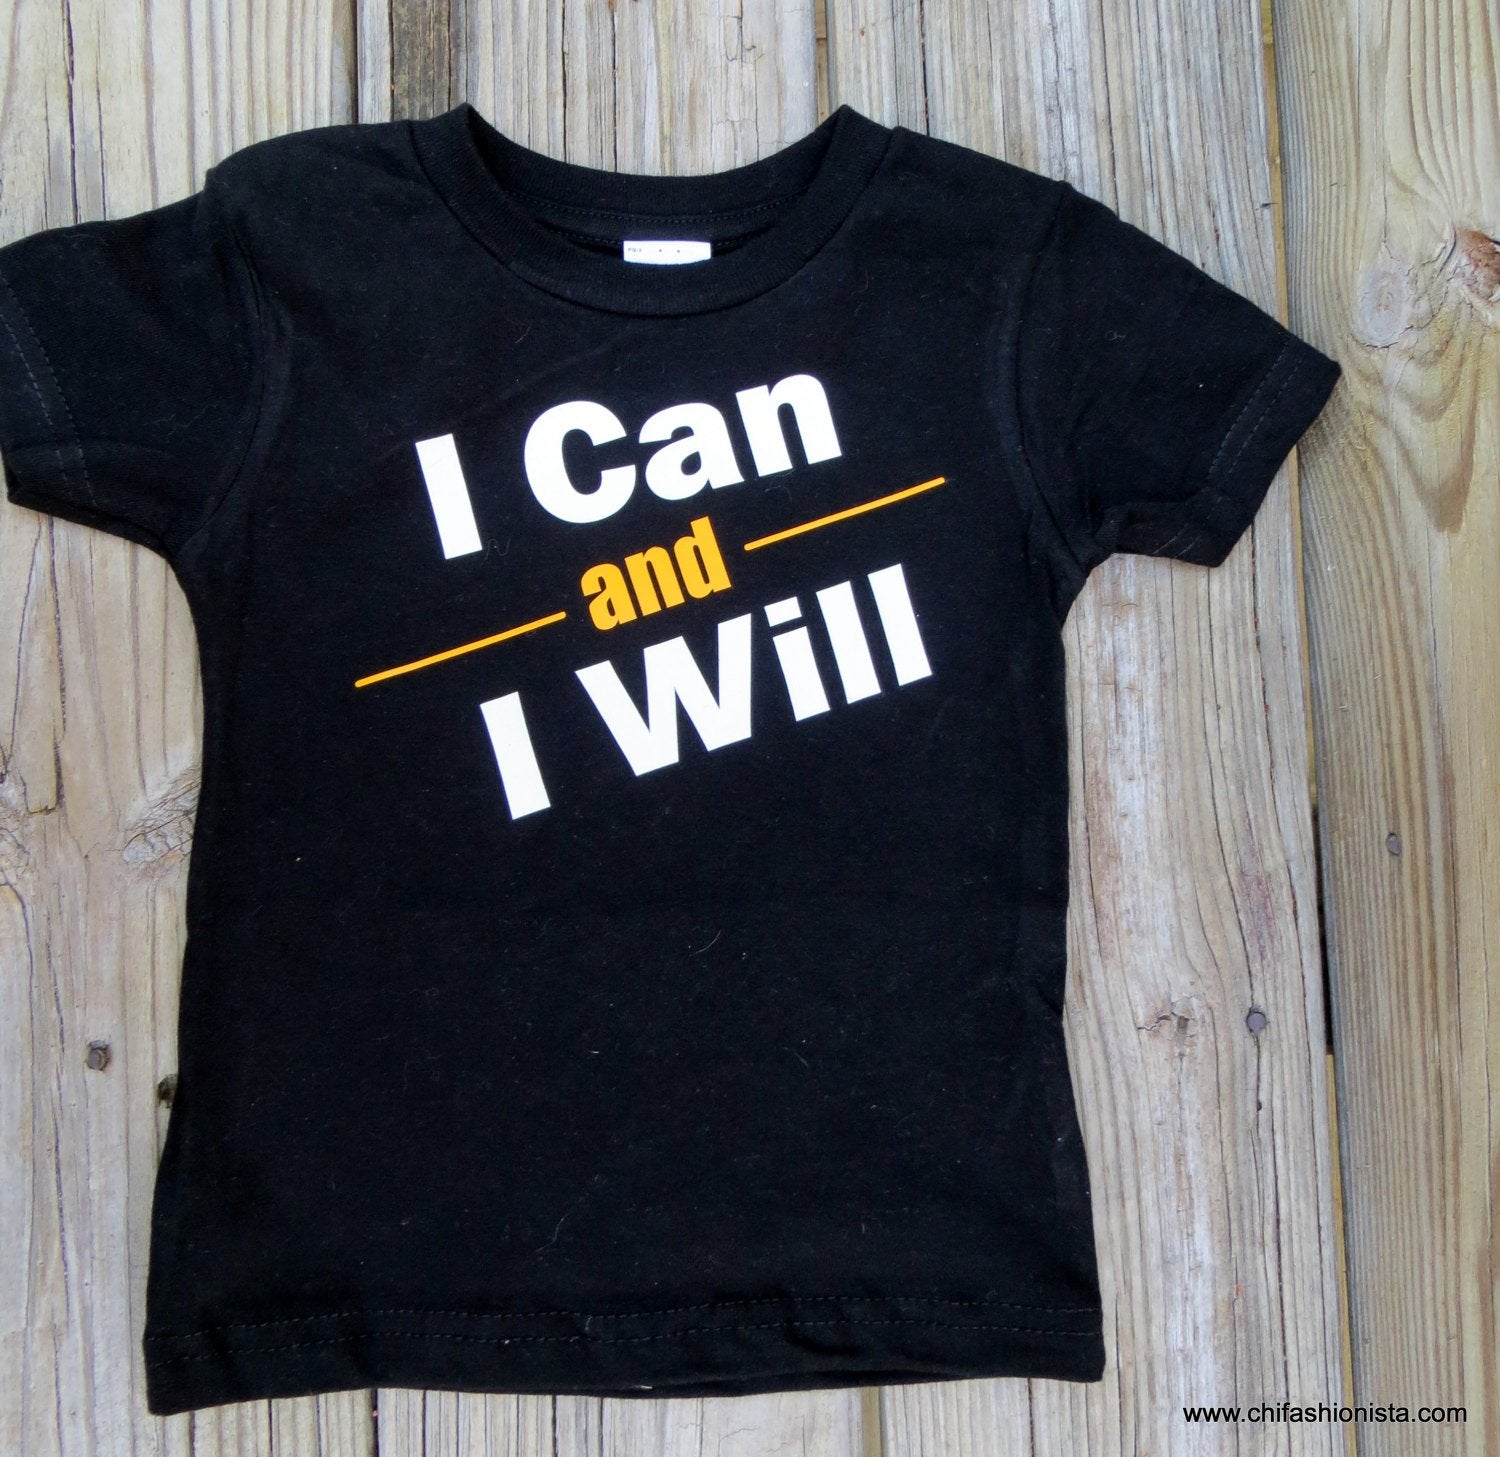 Handcrafted Children's Clothing, Clothing for Children and Parents, I Can and I Will- Spina Bifida Awareness Shirt, chi-fashionista